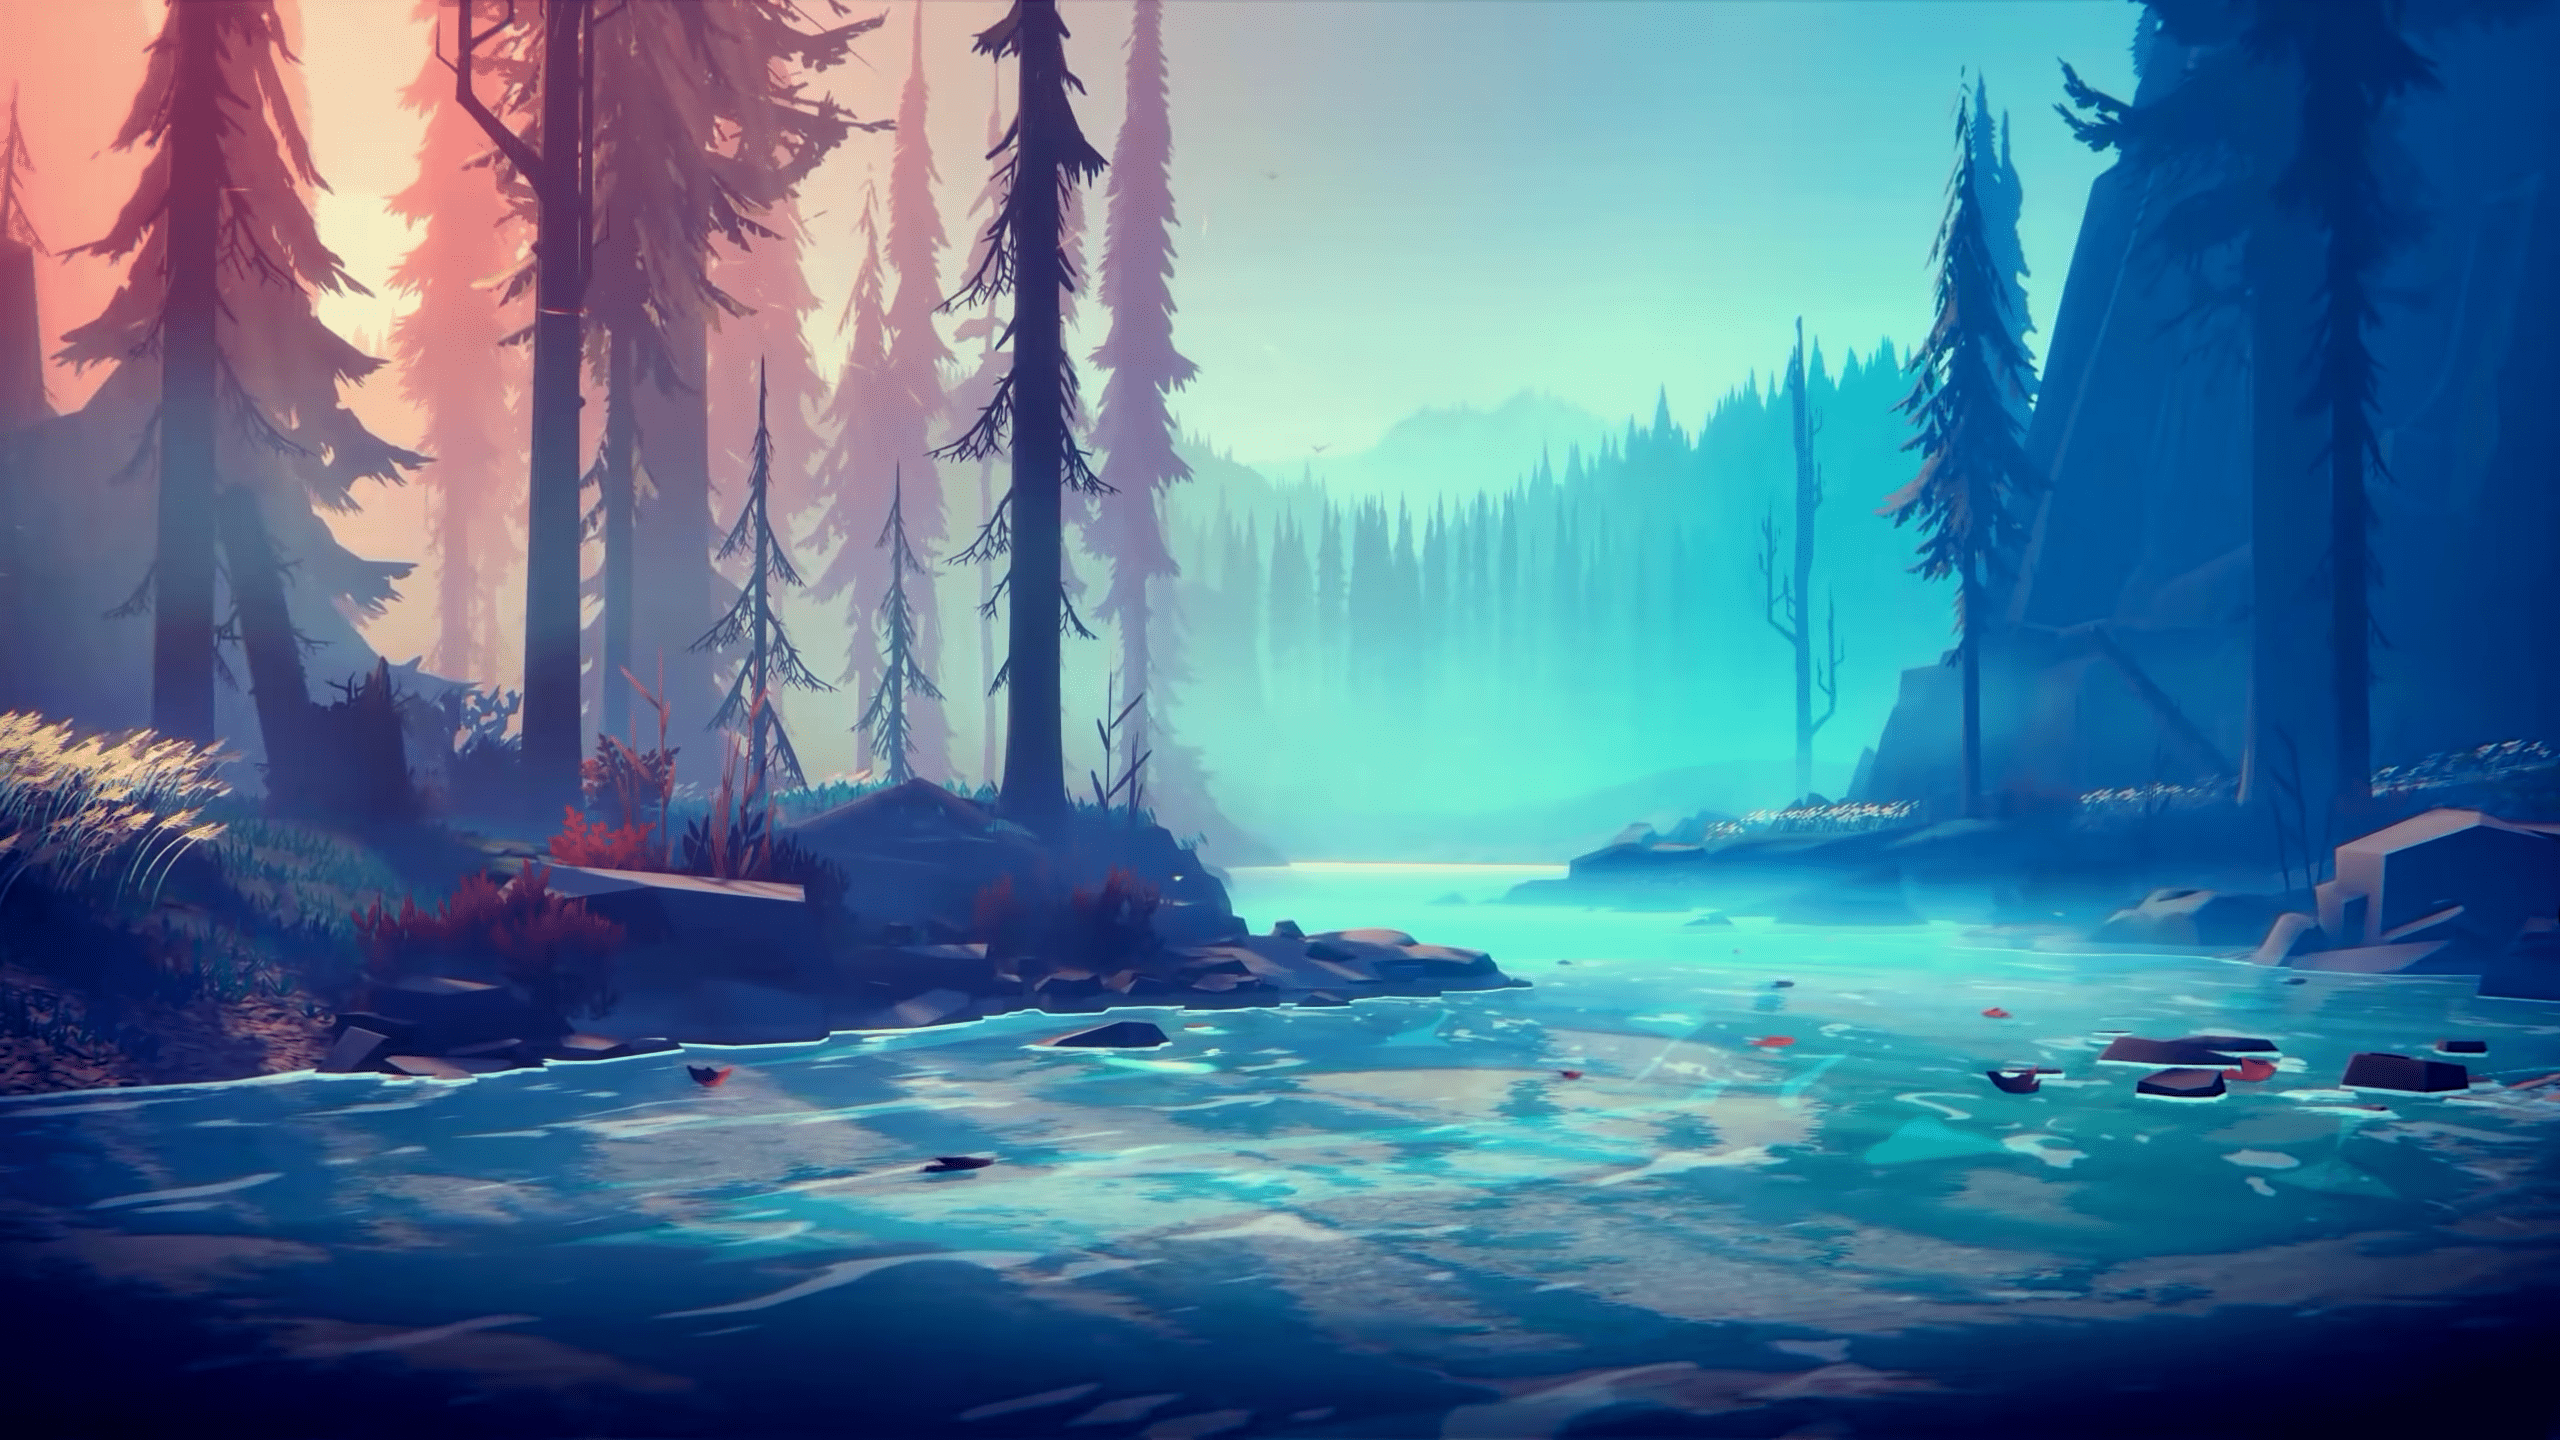 A serene landscape with a river running through a forest, with tall trees on either side and a mountain range in the distance. The sky is a gradient of blue and pink. - 2560x1440